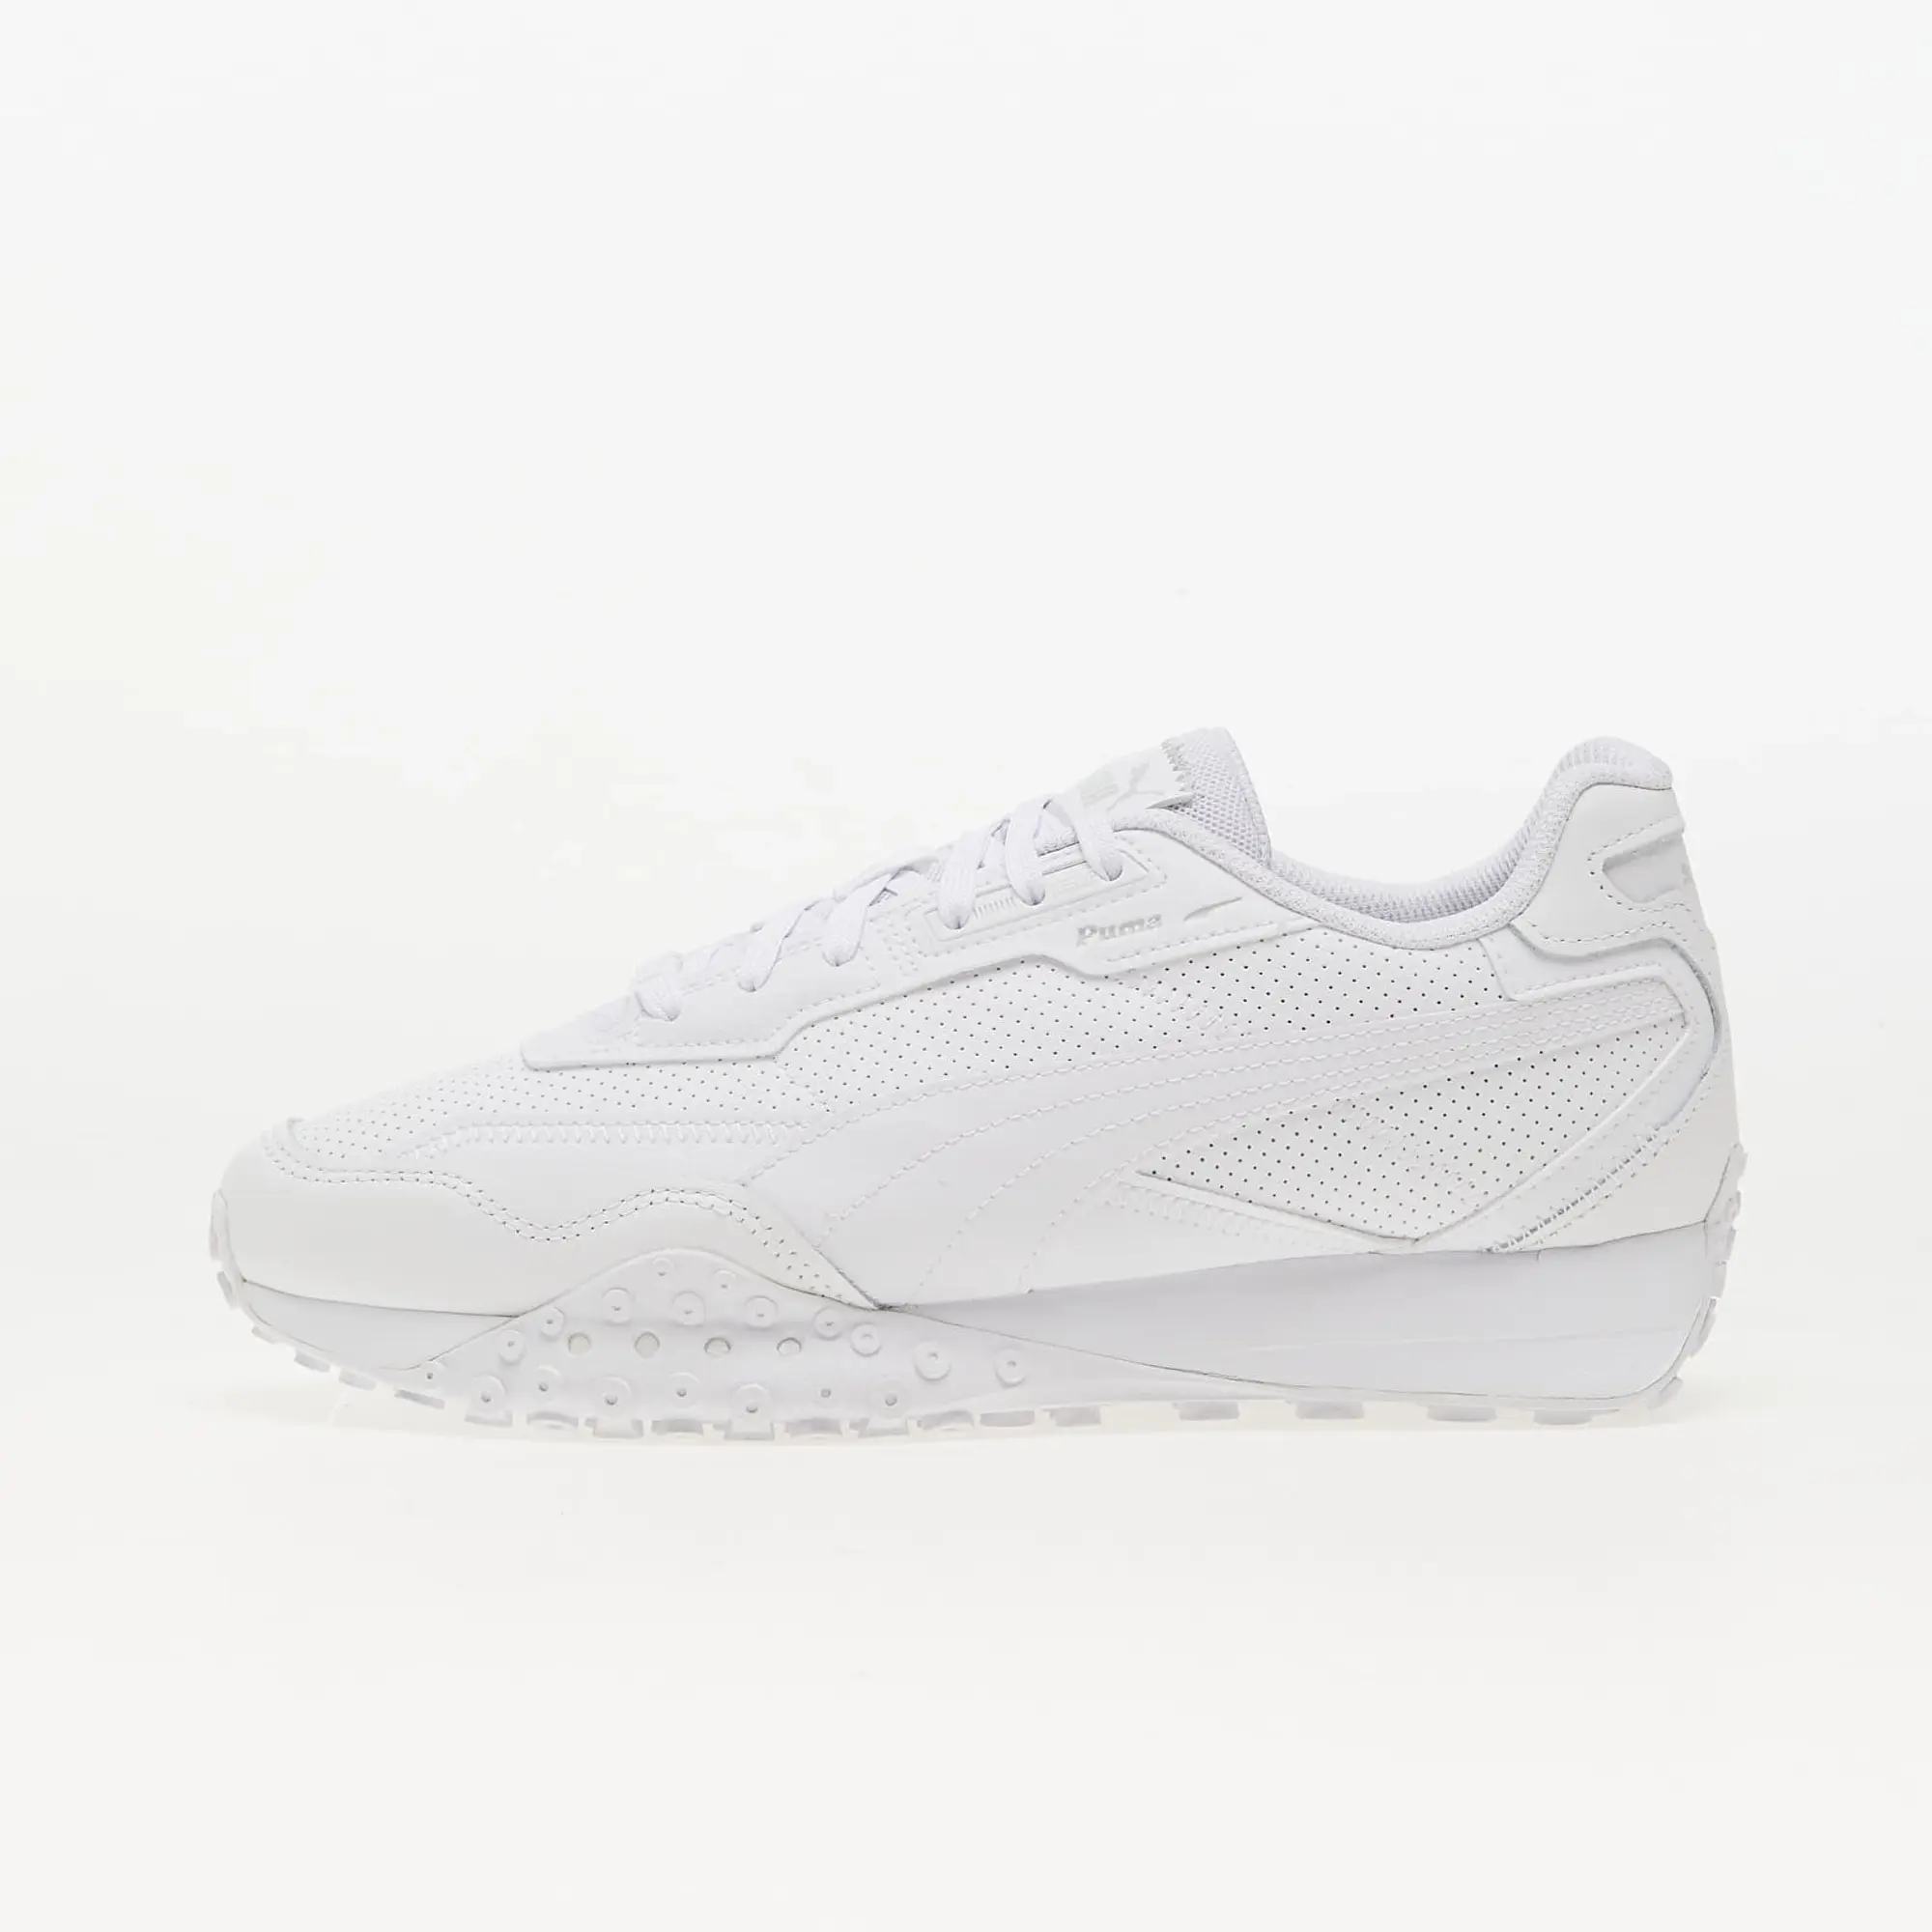 Puma Unisex Blktop Rider Leather Sneakers - White